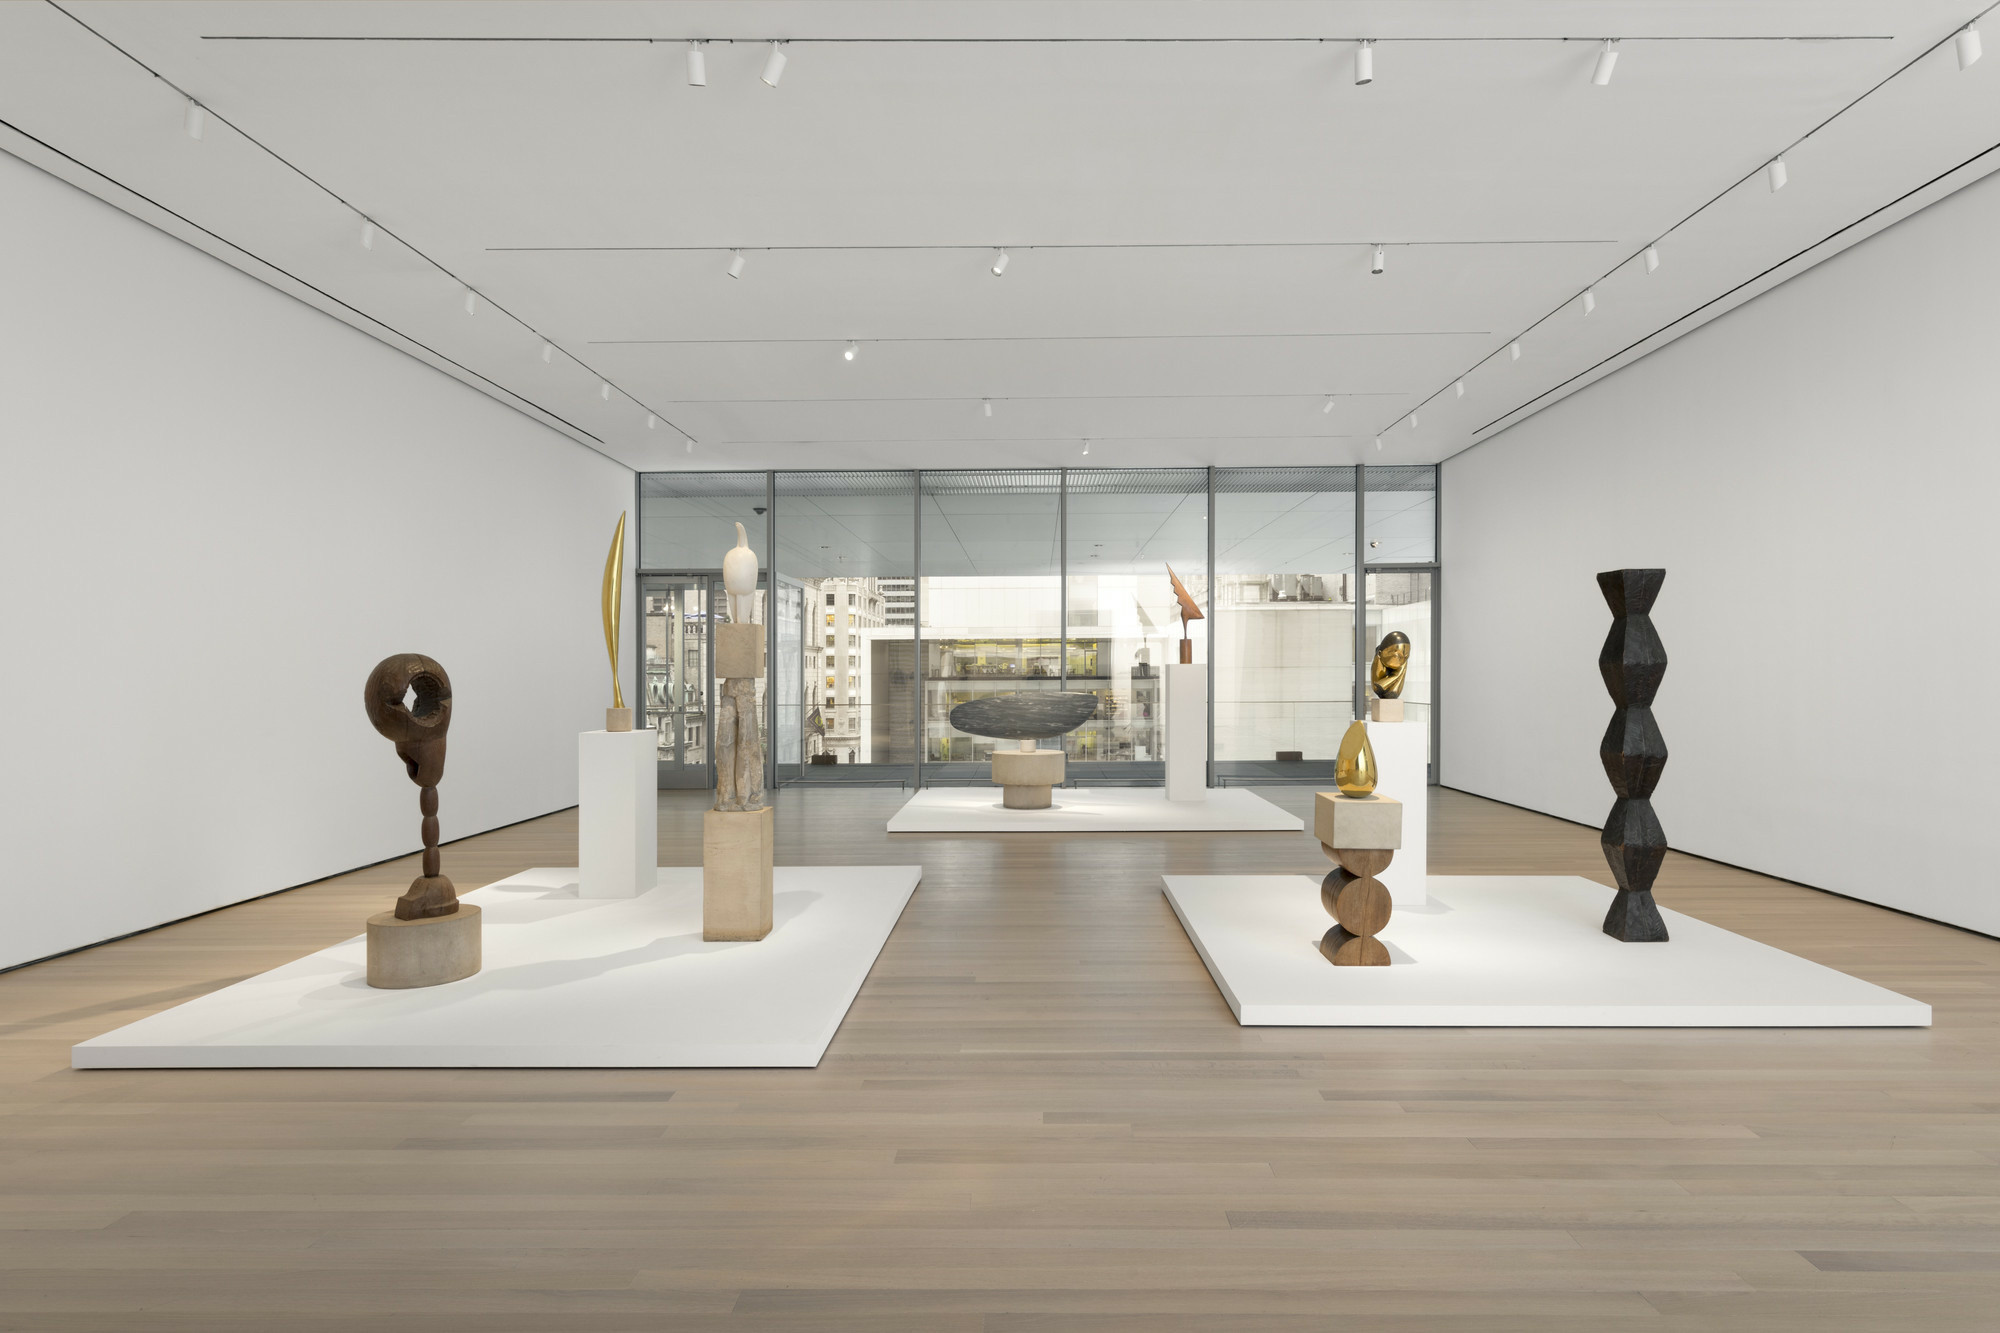 Installation view of the gallery *Constantin Brancusi* in the exhibition *Collection 1880s-1940s*. October 21, 2019–ongoing. Photographed in October 2019. Photograph by Martin Seck